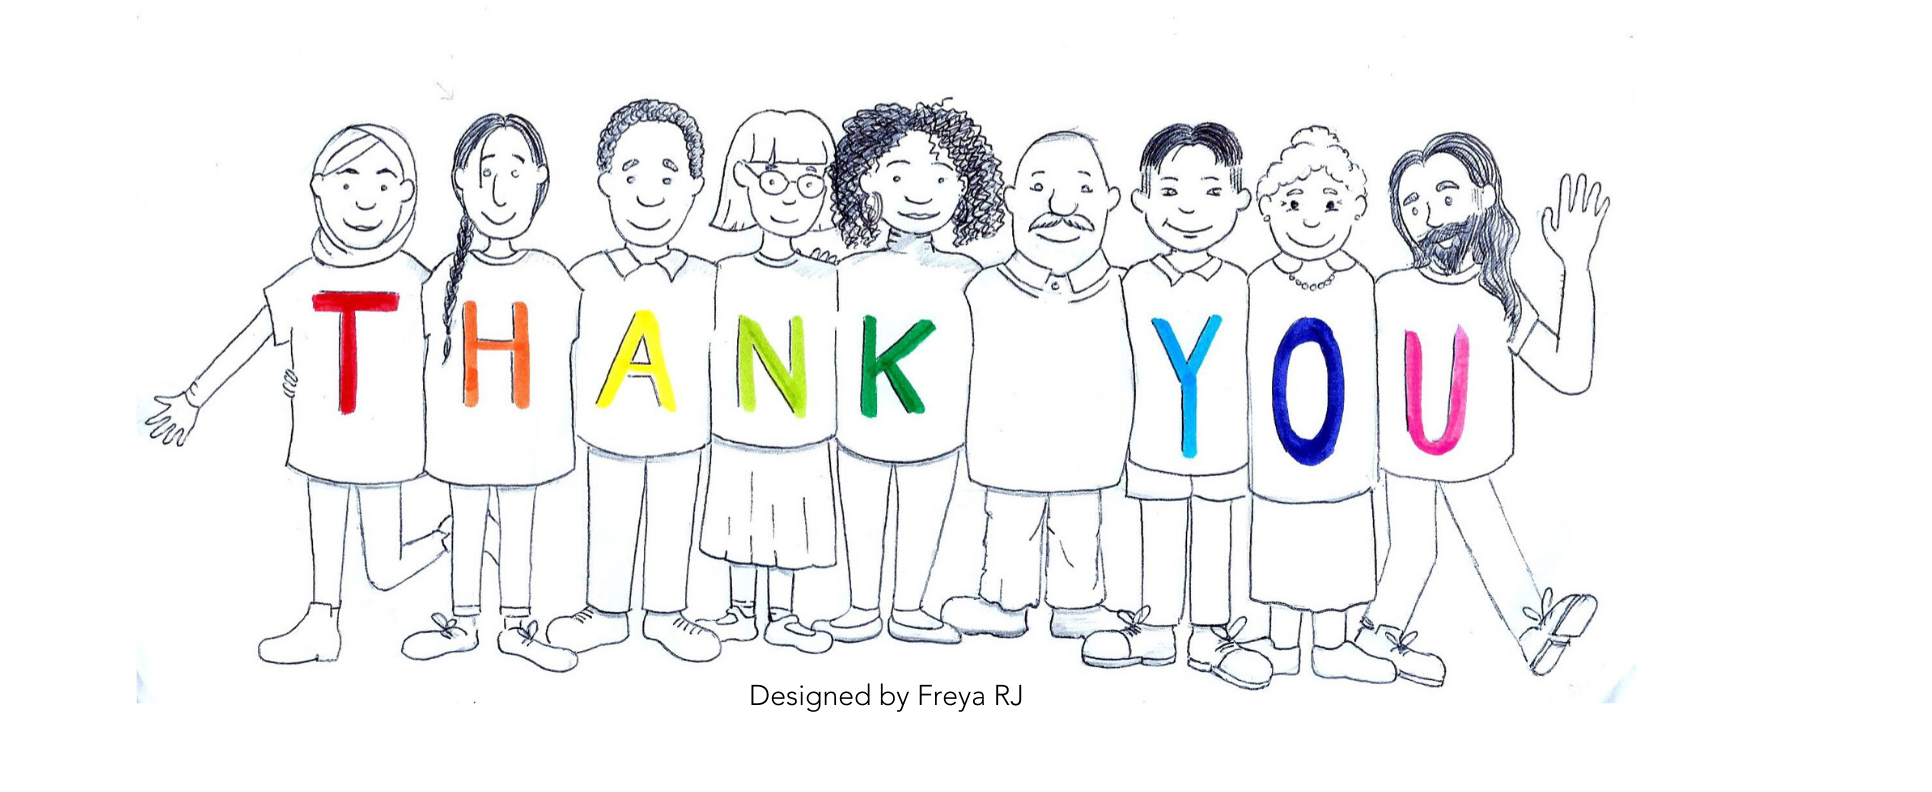 Line drawing of people with the words "thank you" spelled out on their t-shirts